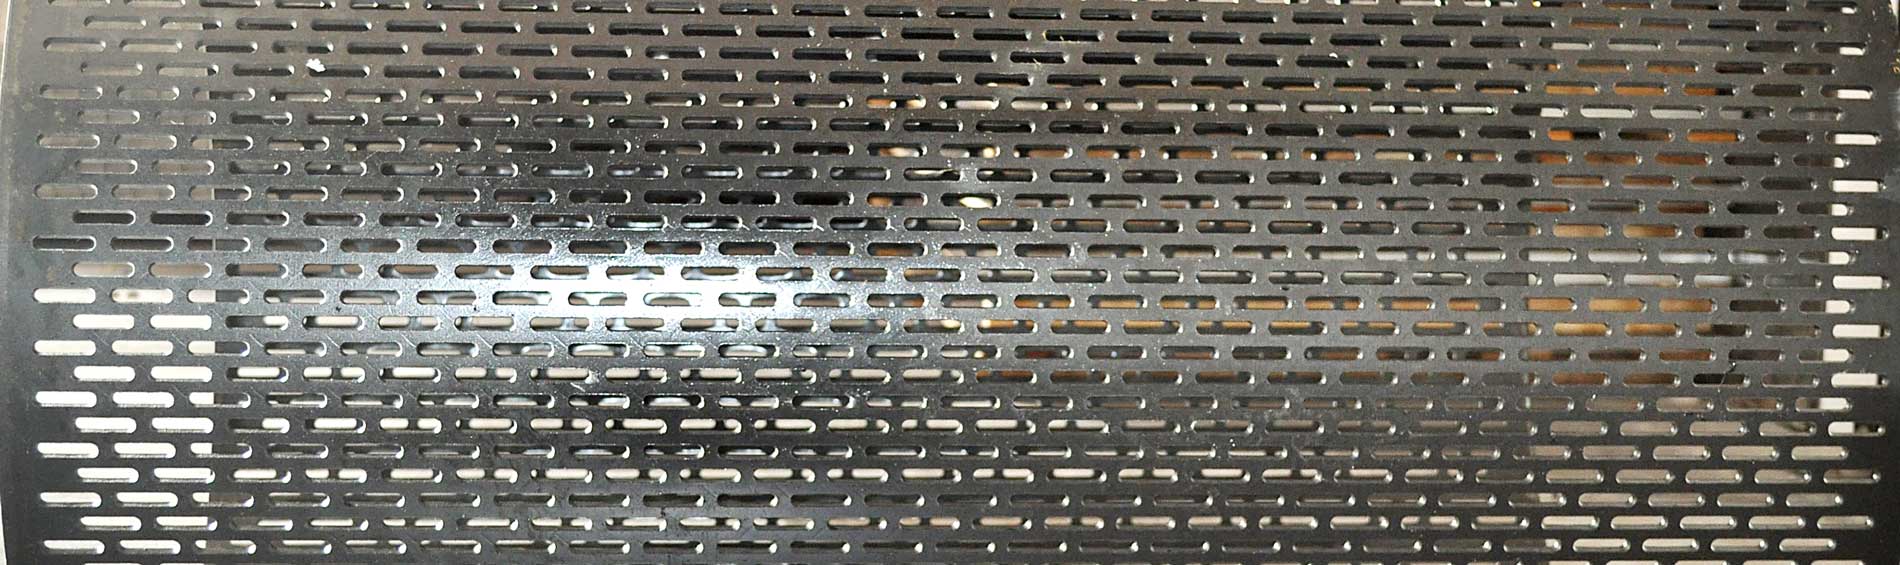 Slotted Hole Perforated Metal Sheet - Dongfu Perforating